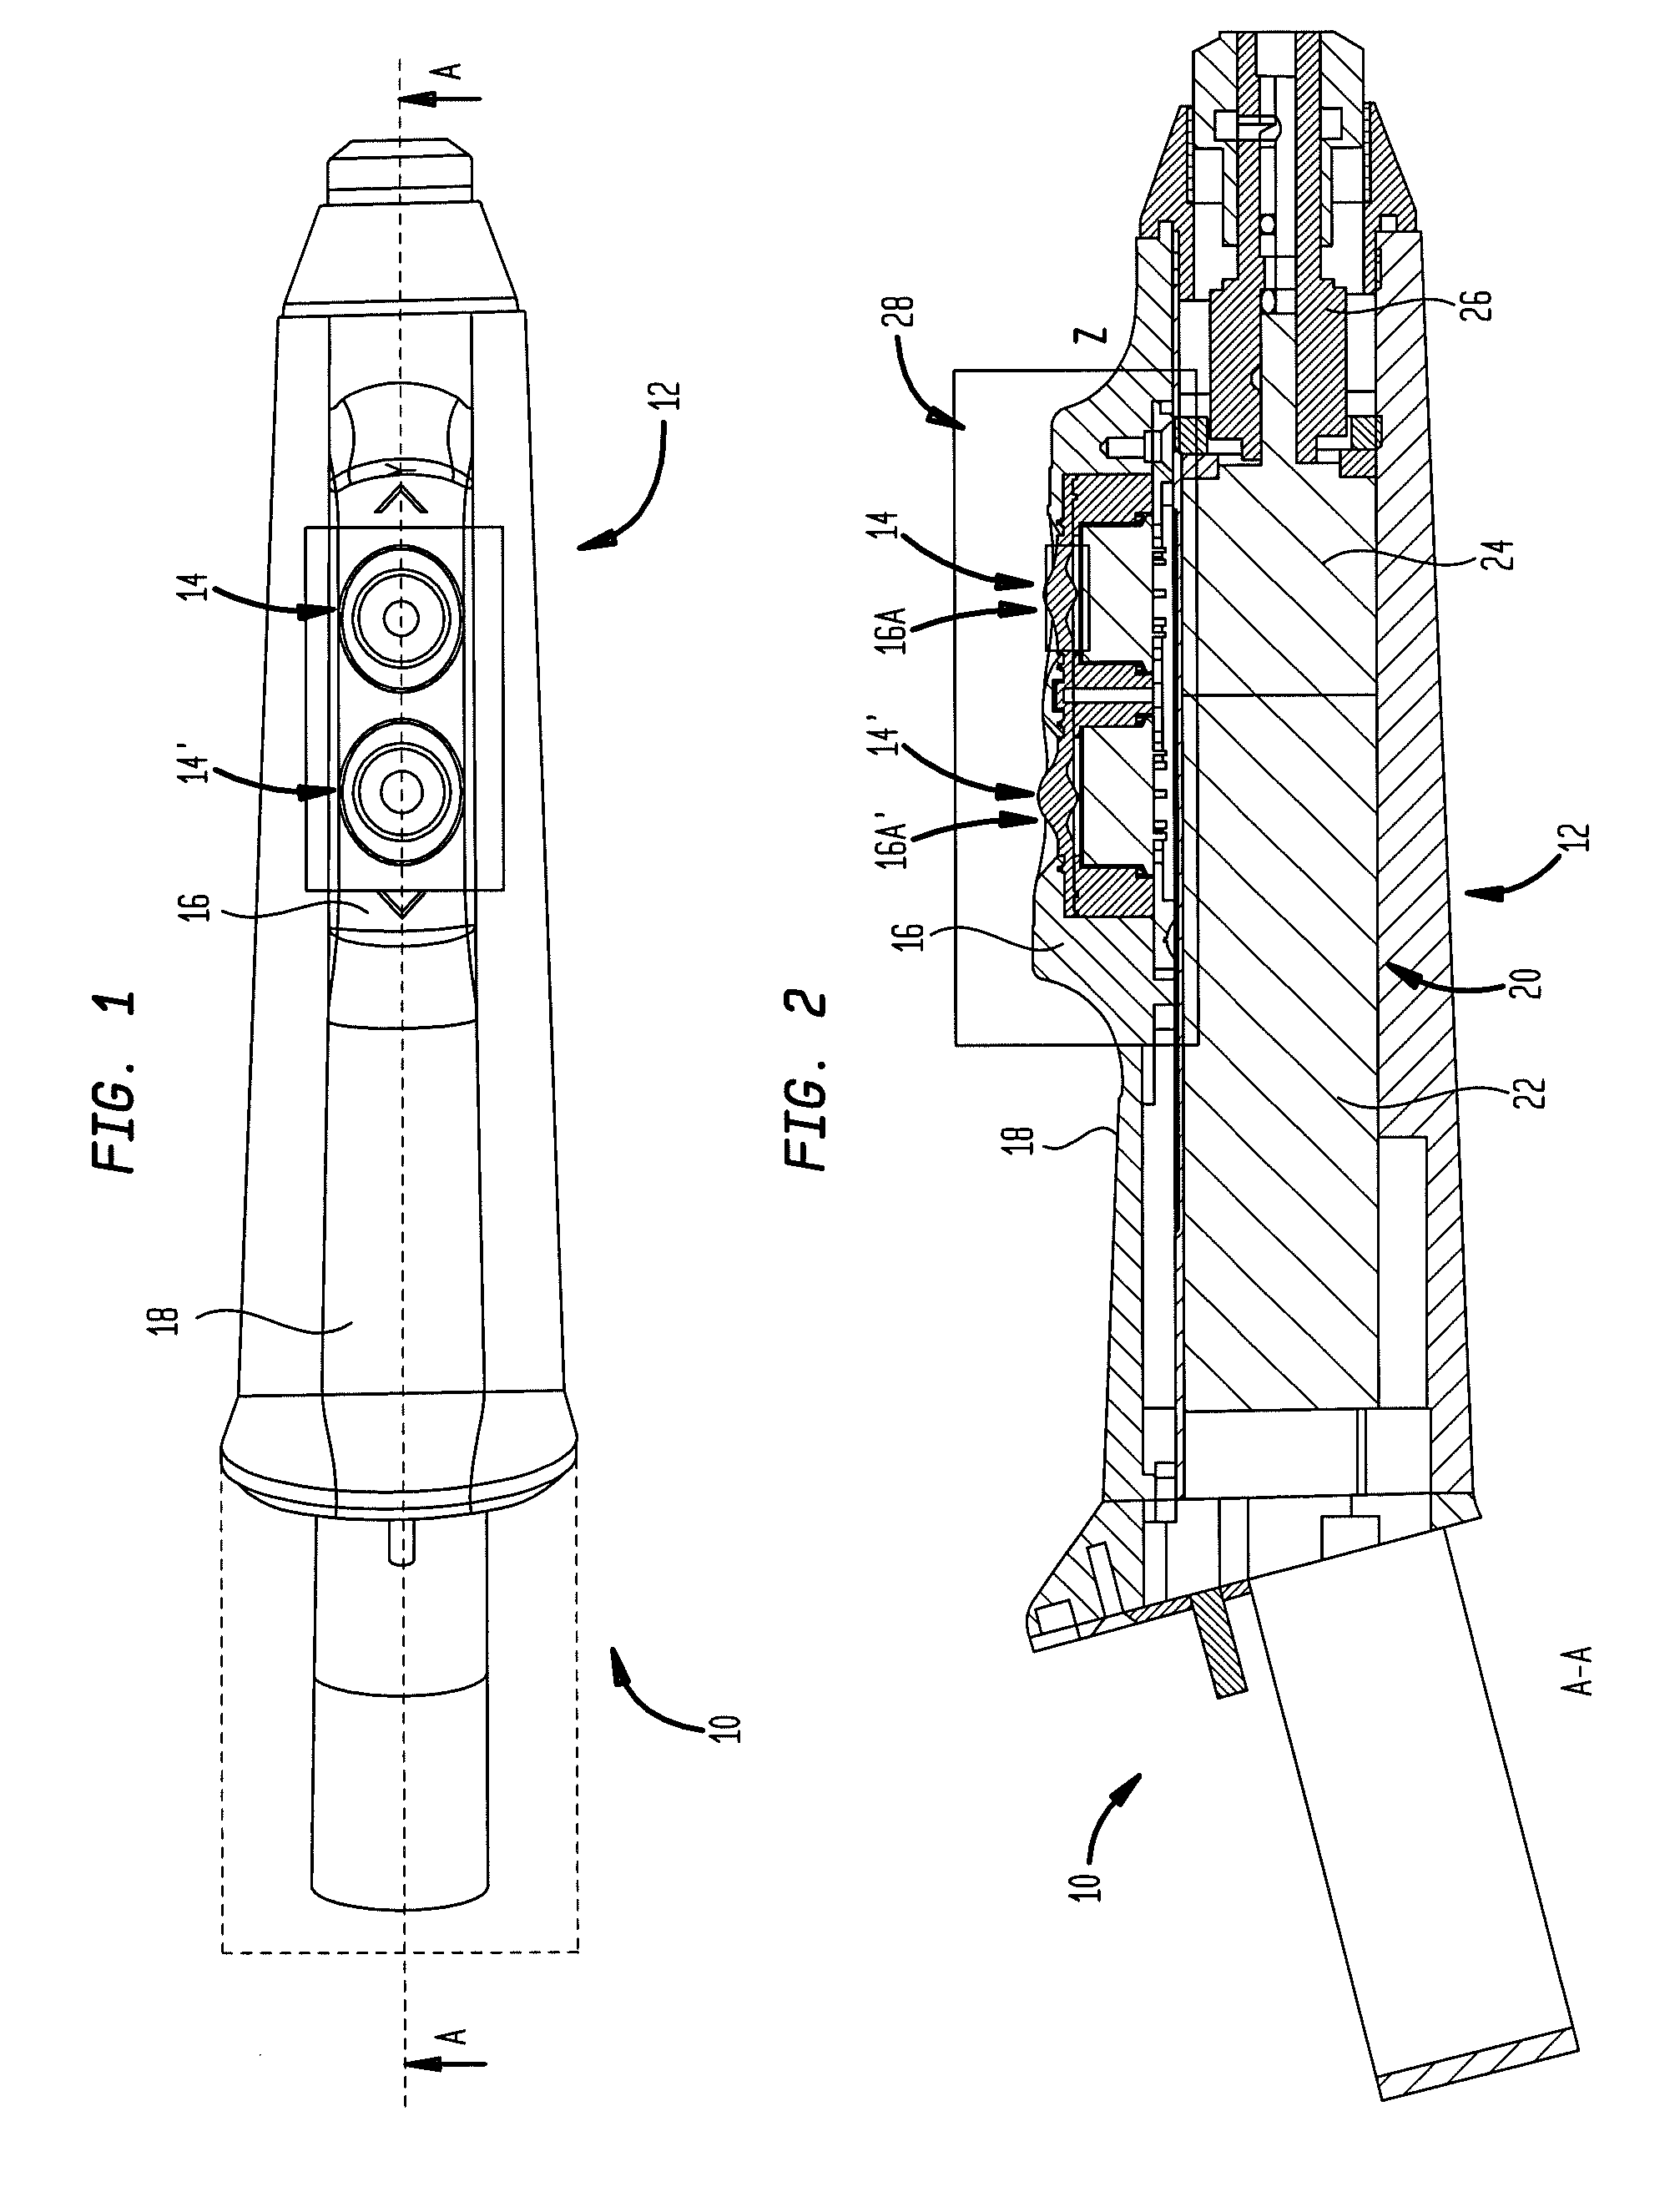 Surgical power tool and actuation assembly therefor